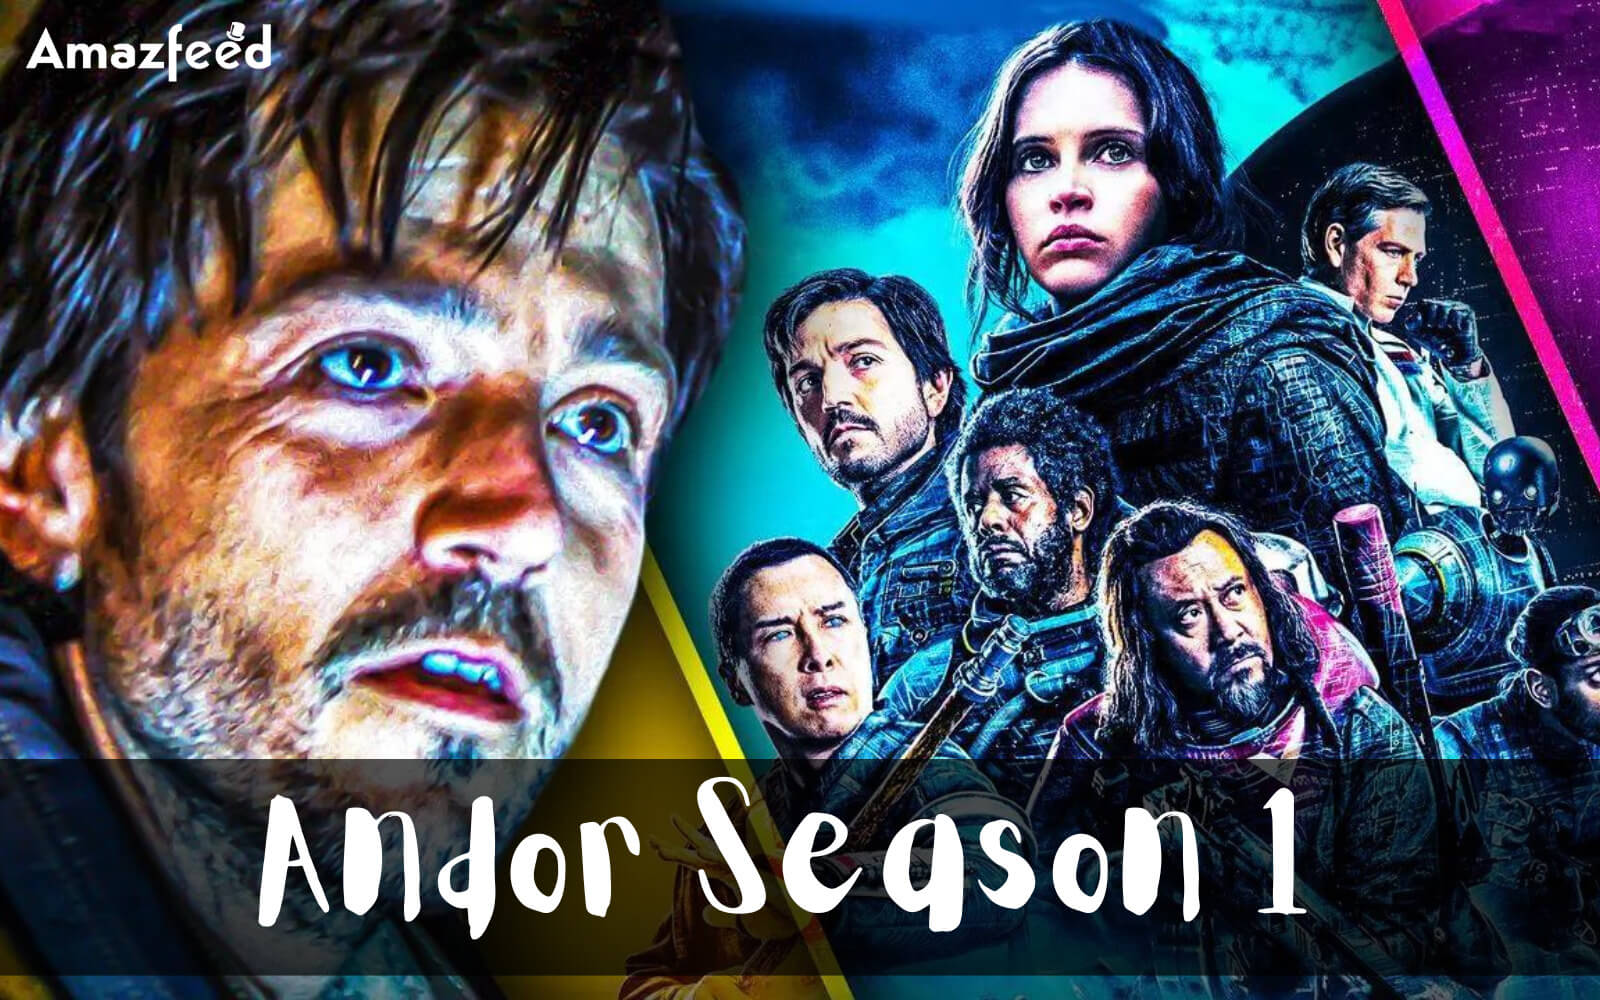 When Is Andor Season 1 Coming Out (Release Date)